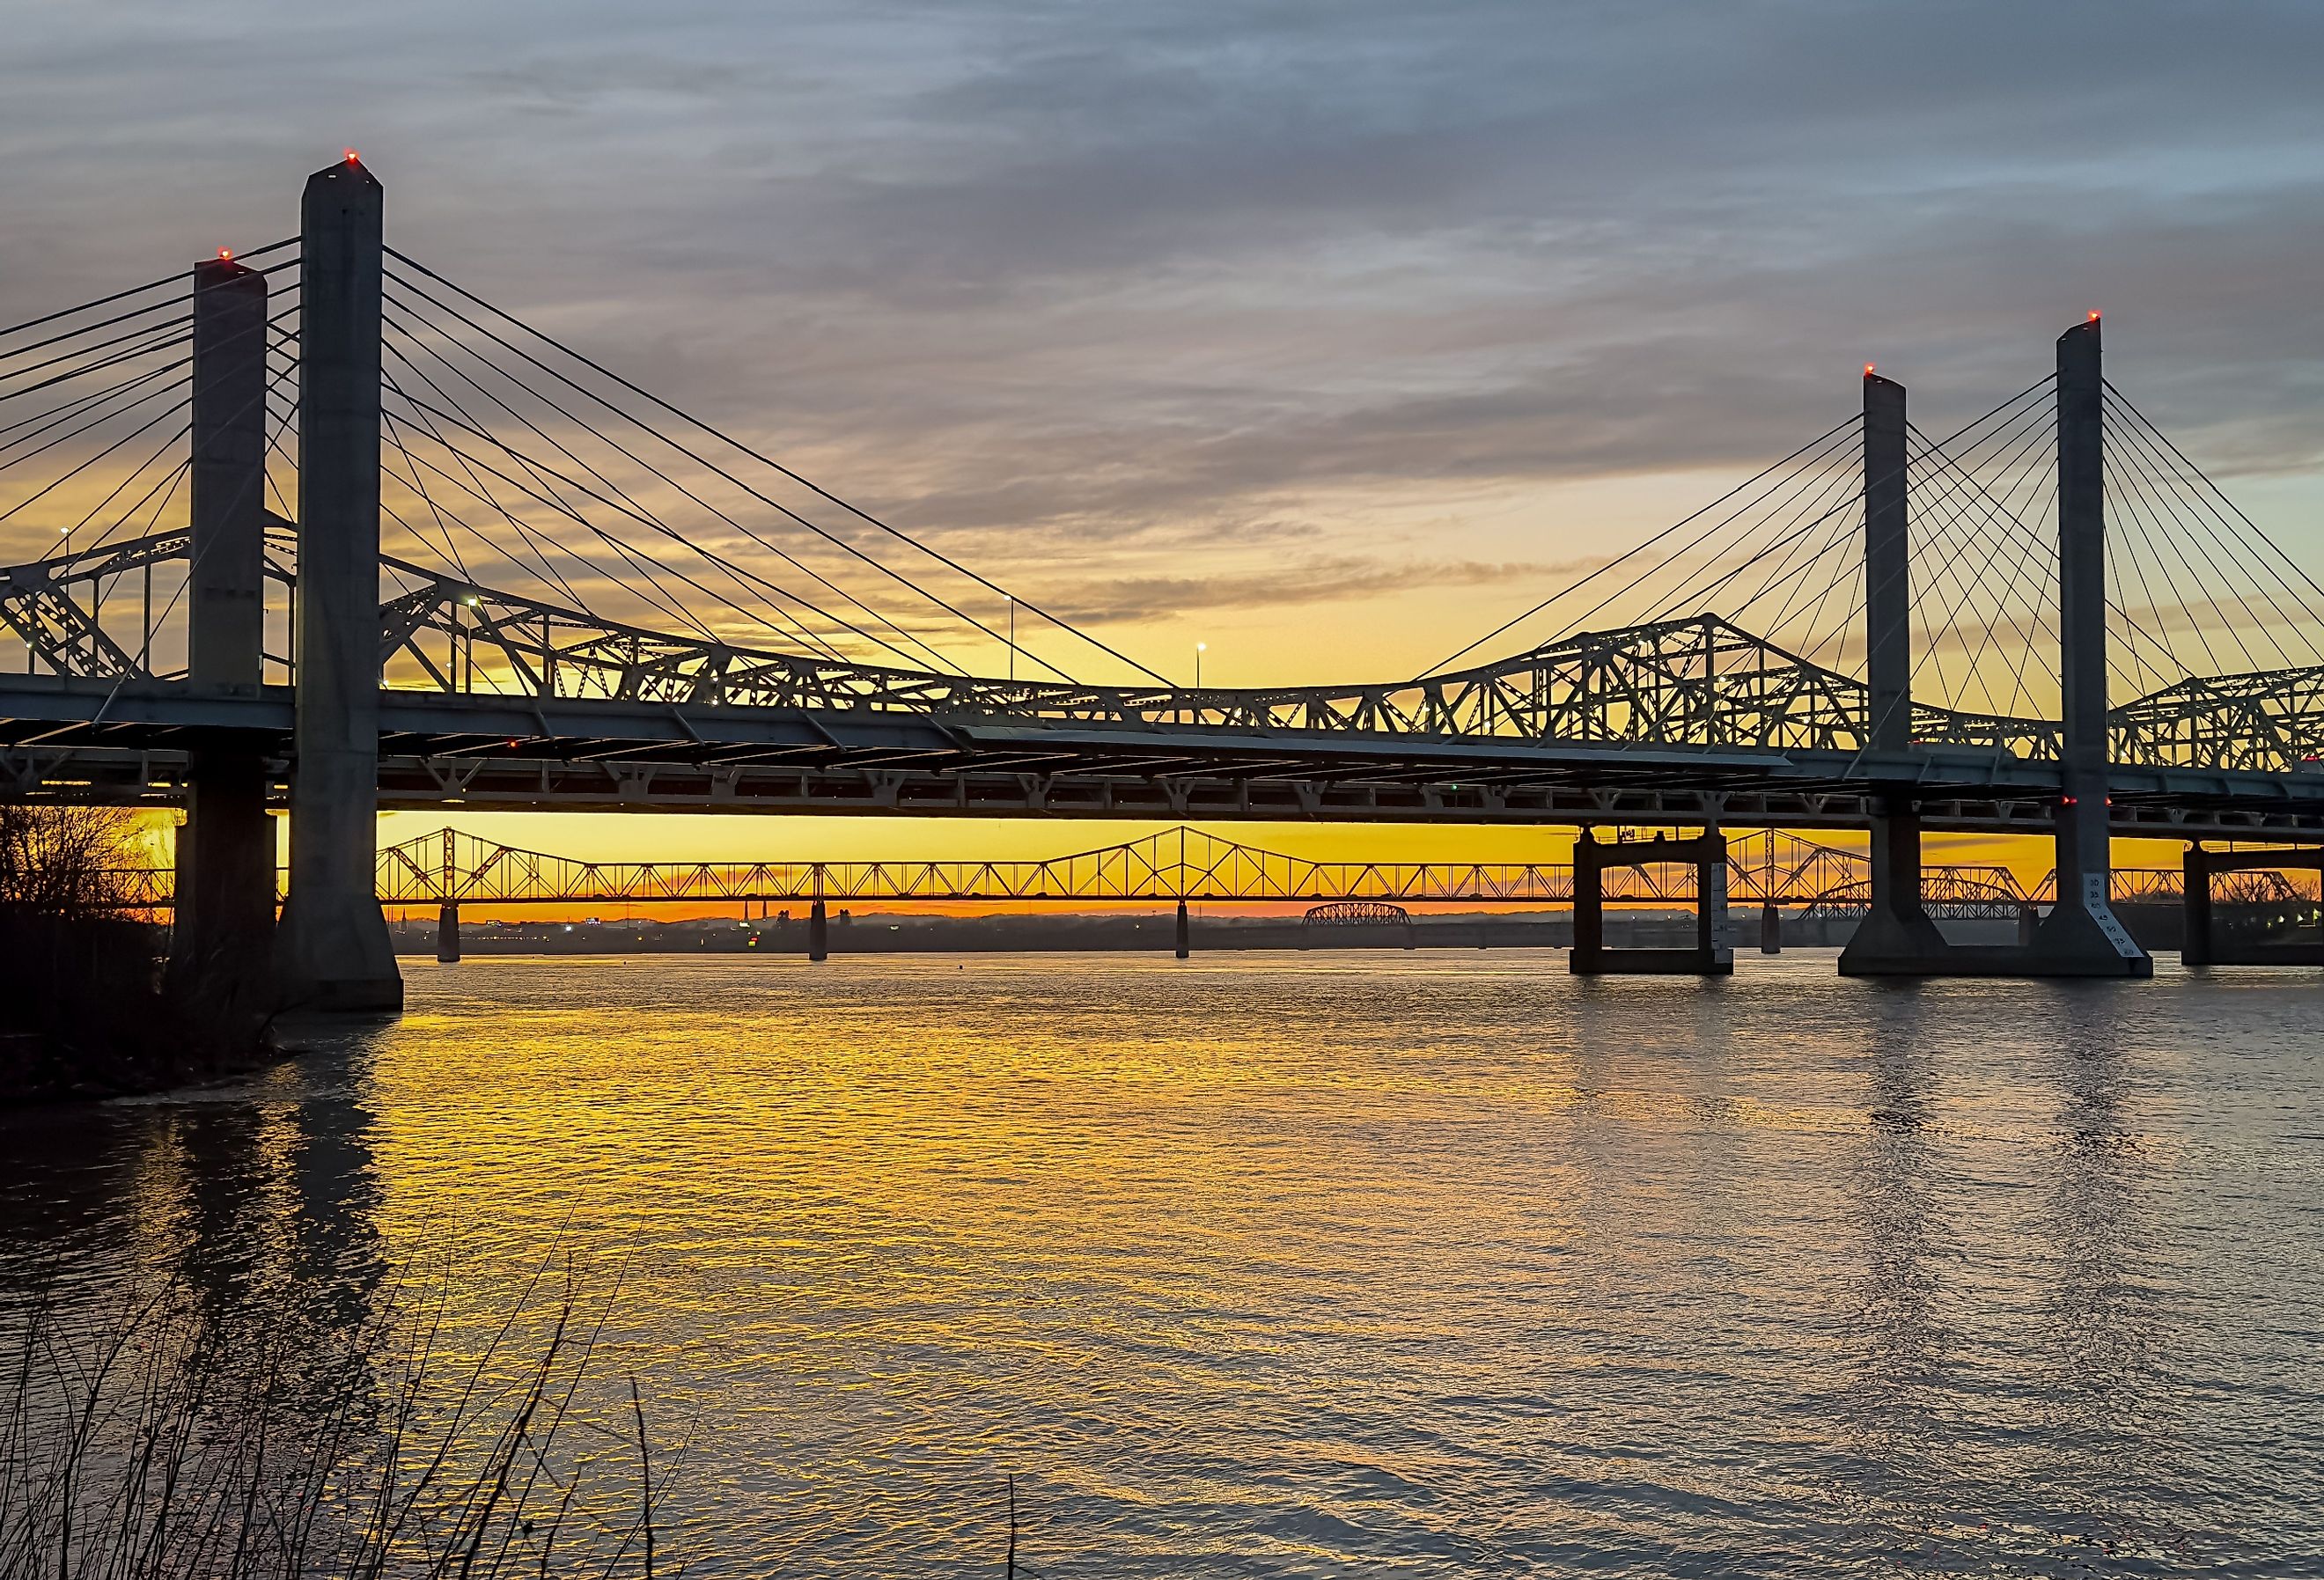 John F. Kennedy Bridge and Abraham Lincoln Bridge crossing the Ohio River between Louisville, Kentucky and Jeffersonville, Indiana at sunset. Image credit Carrie A Hanrahan via Shutterstock.